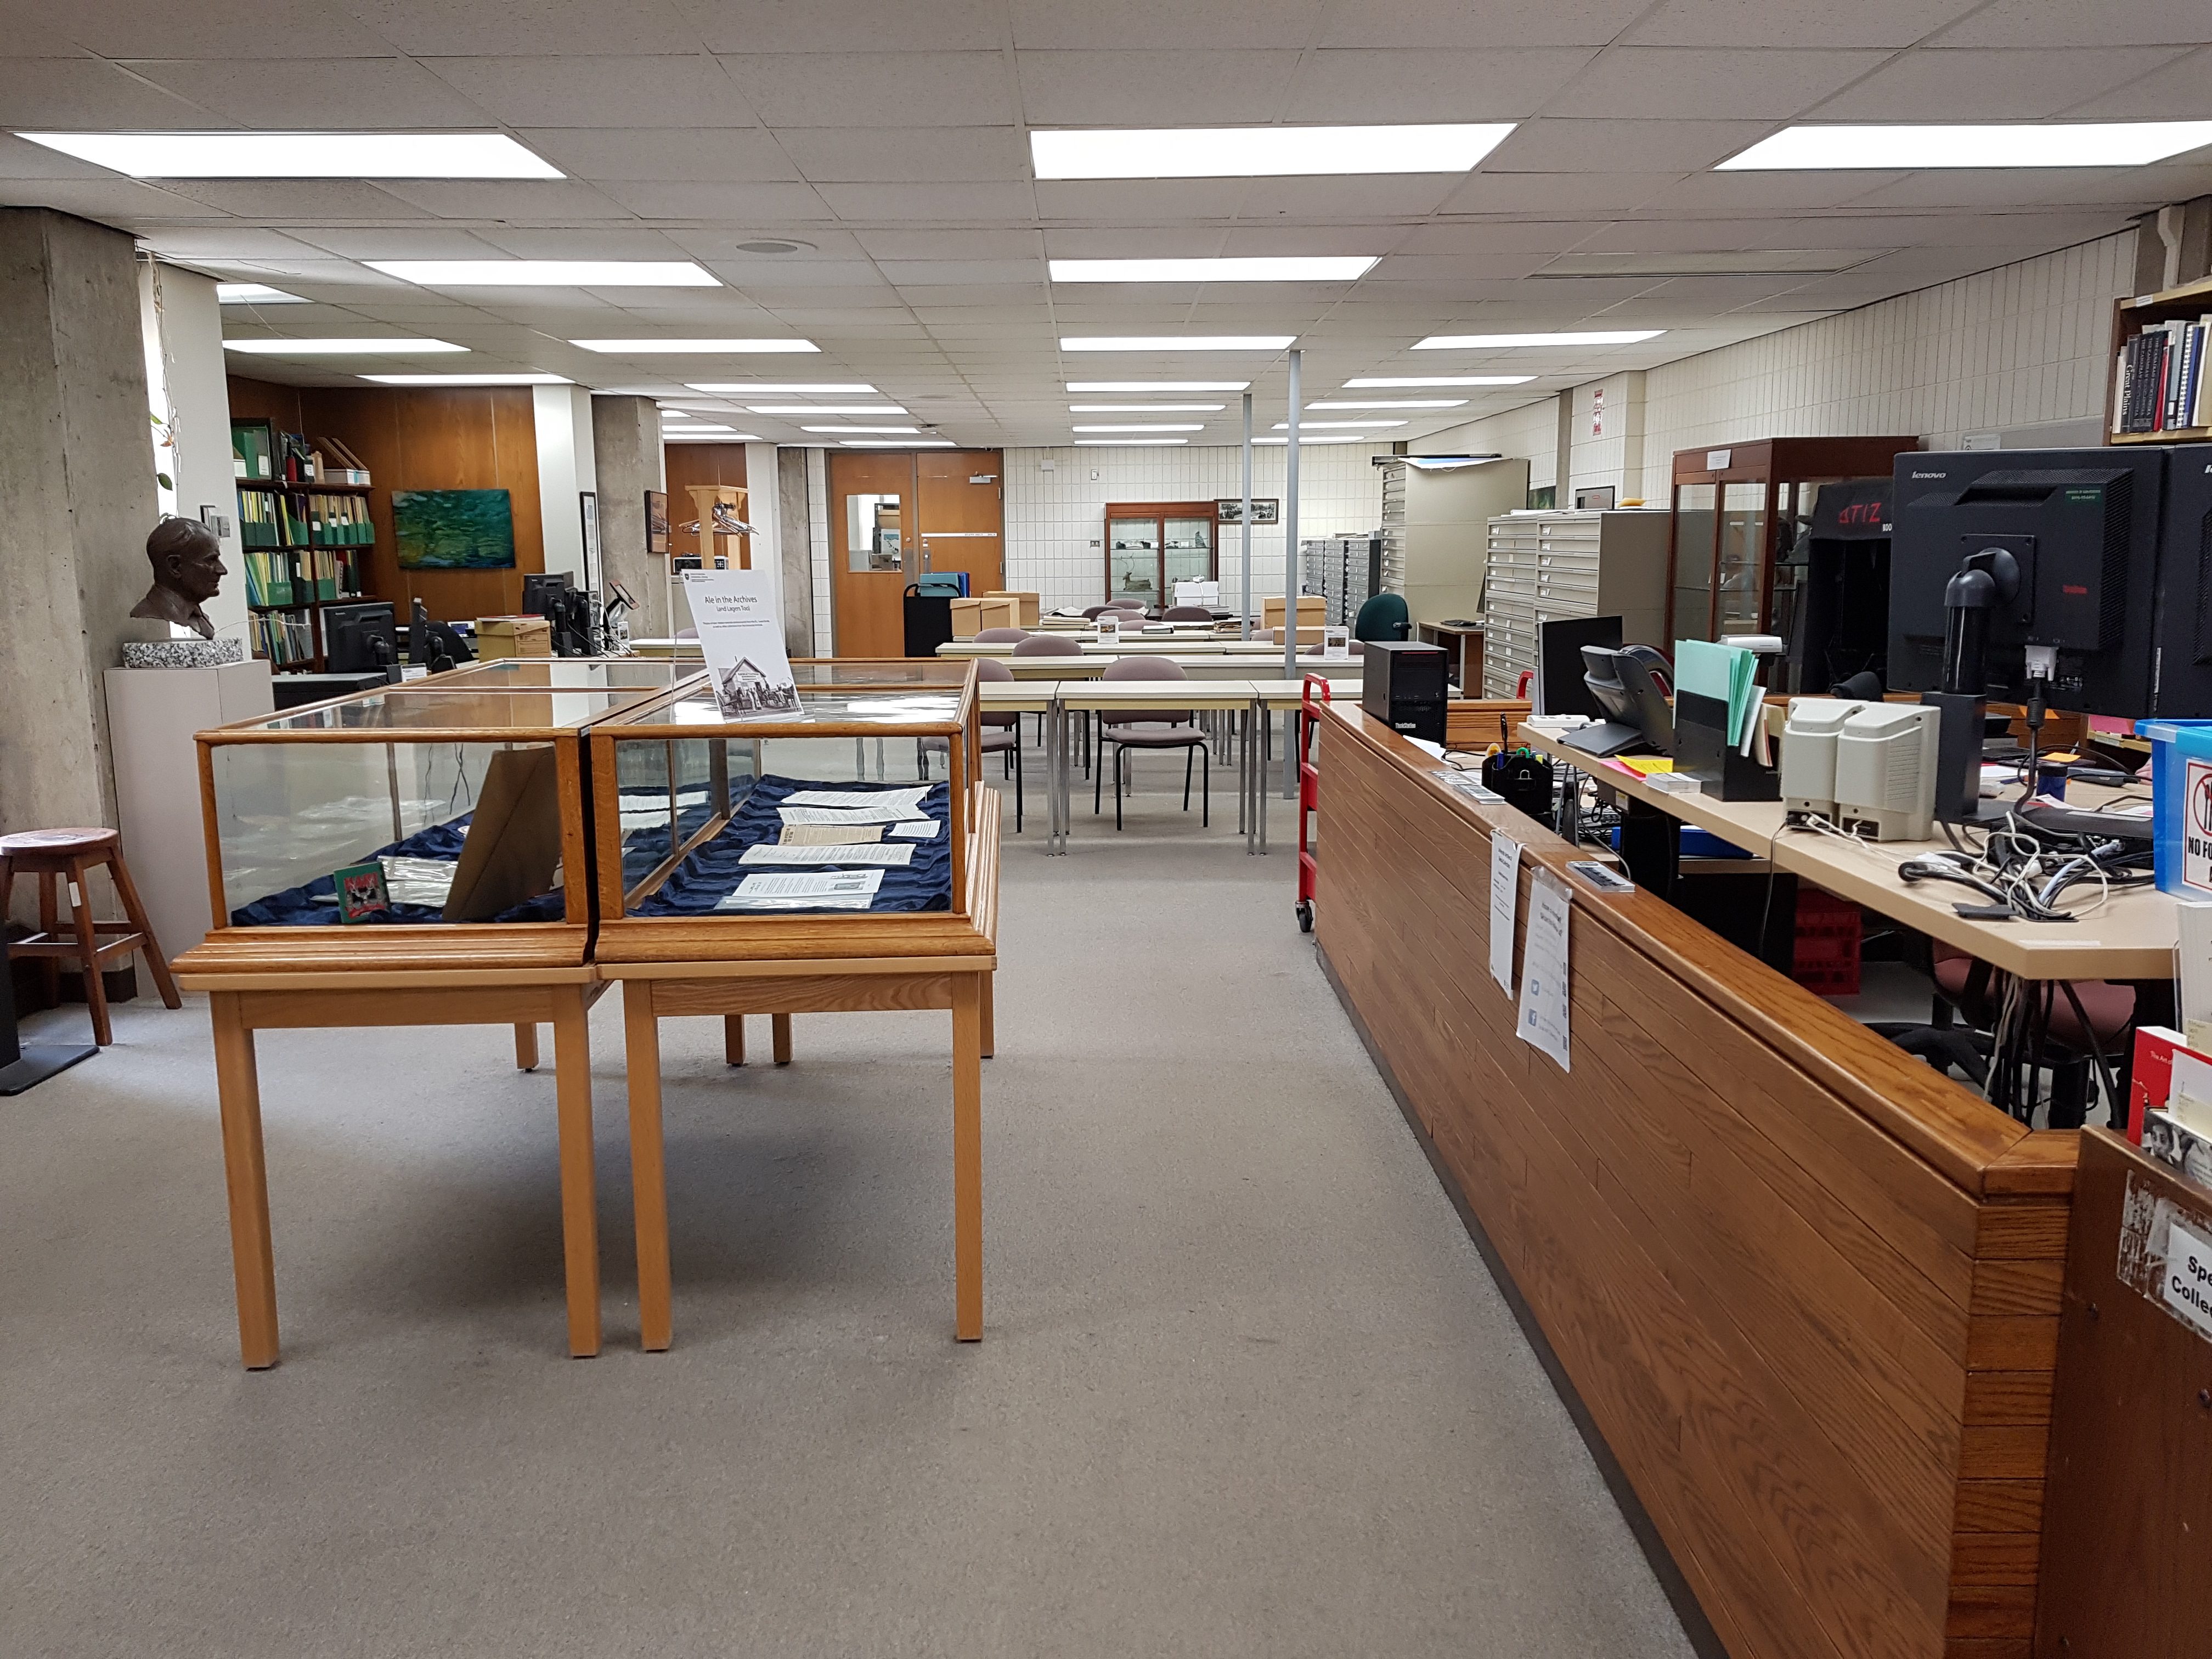 Photograph of display cabinets and tables in the UASC reading room.